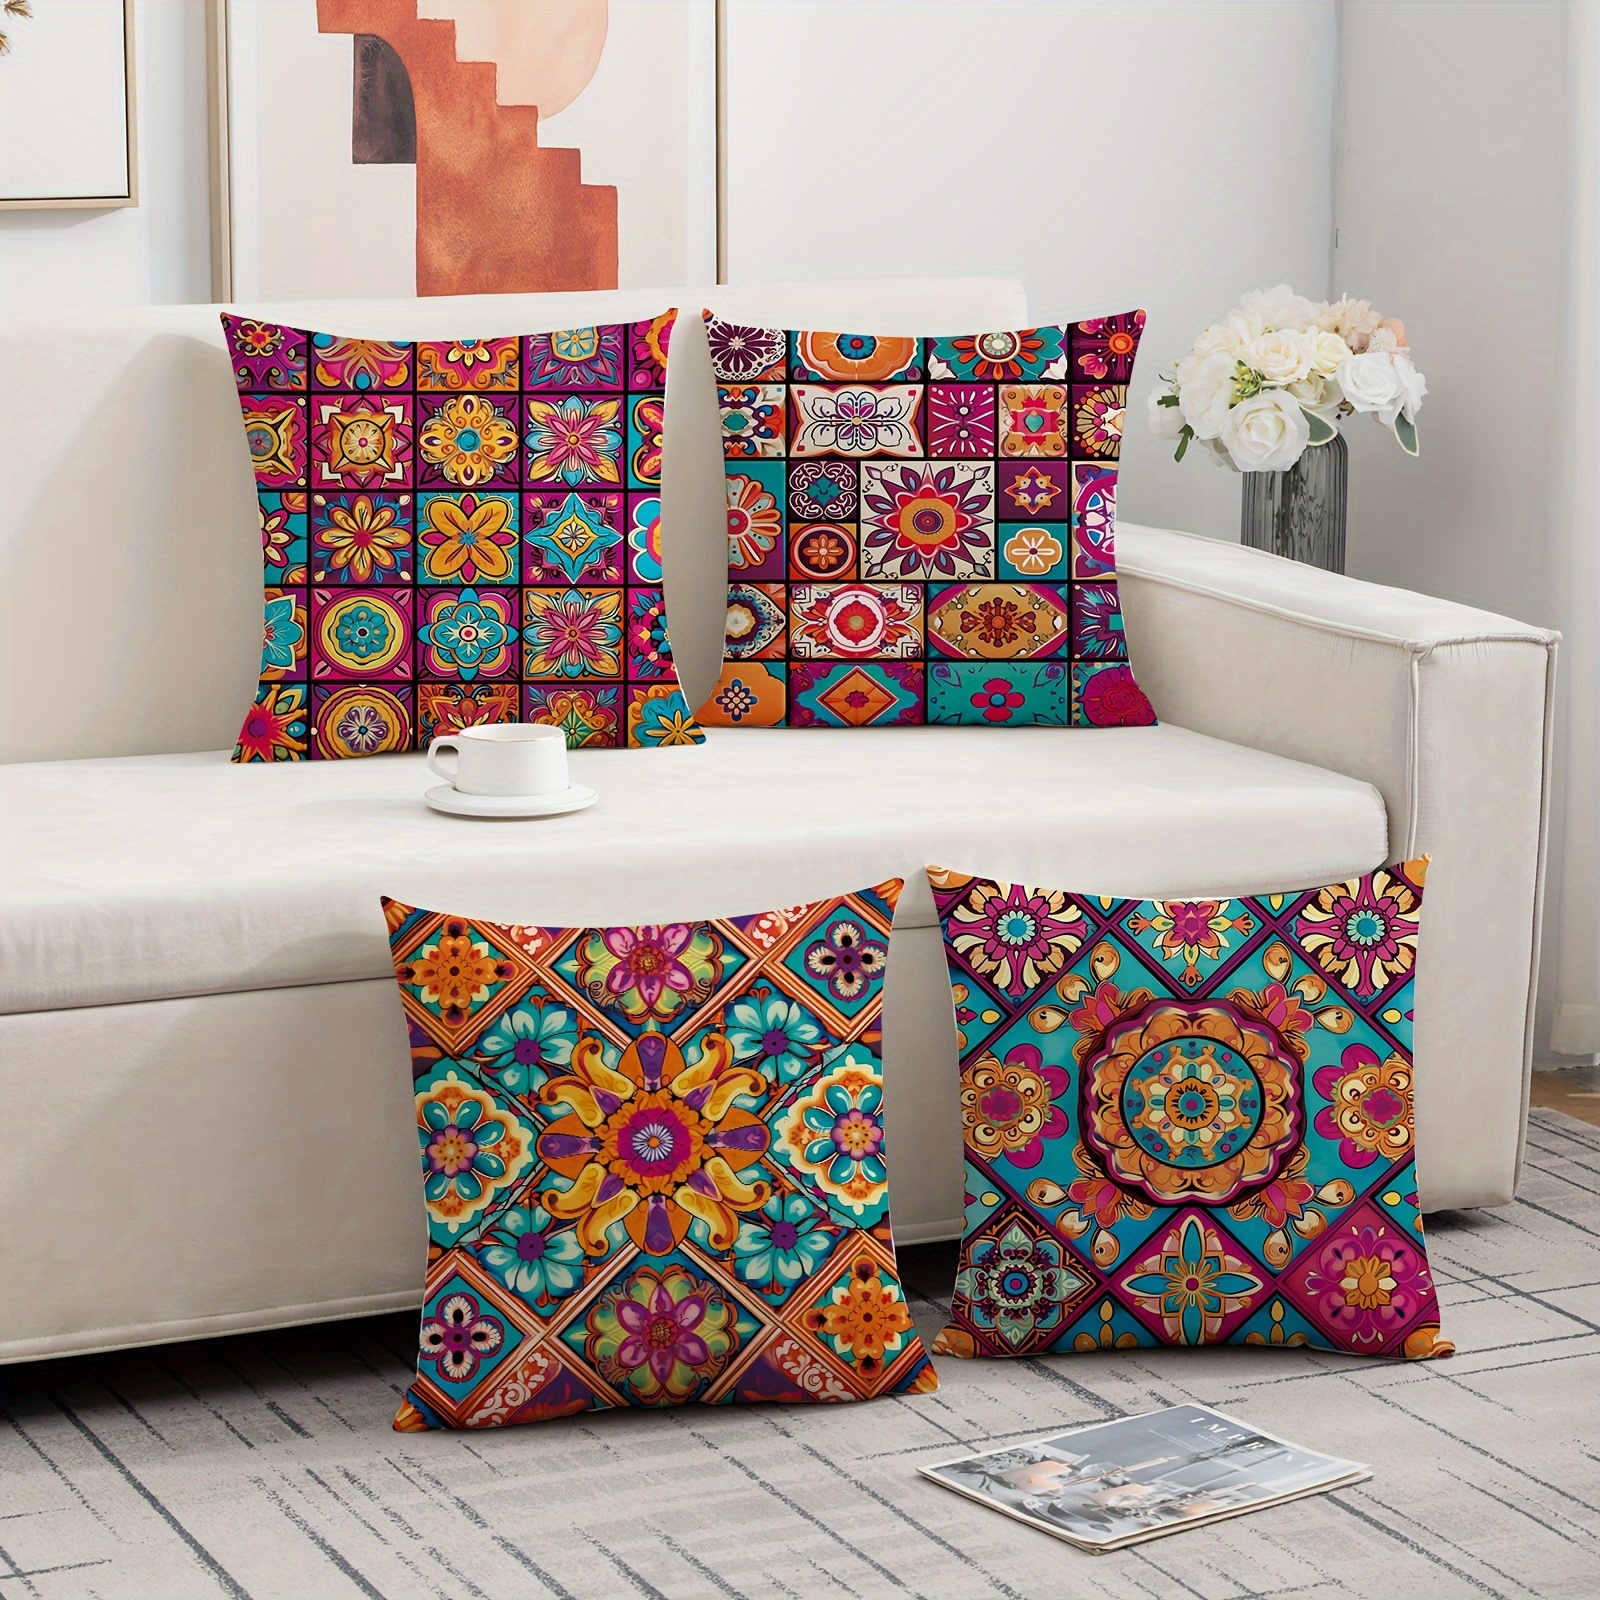 

4pcs, Bohemian Style Cushion Covers, 18x18 Inches, Colorful Mandala Traditional Ethnic Pattern, Decorative Throw Pillow Cases For Couch, Hotel, Homestay Decor